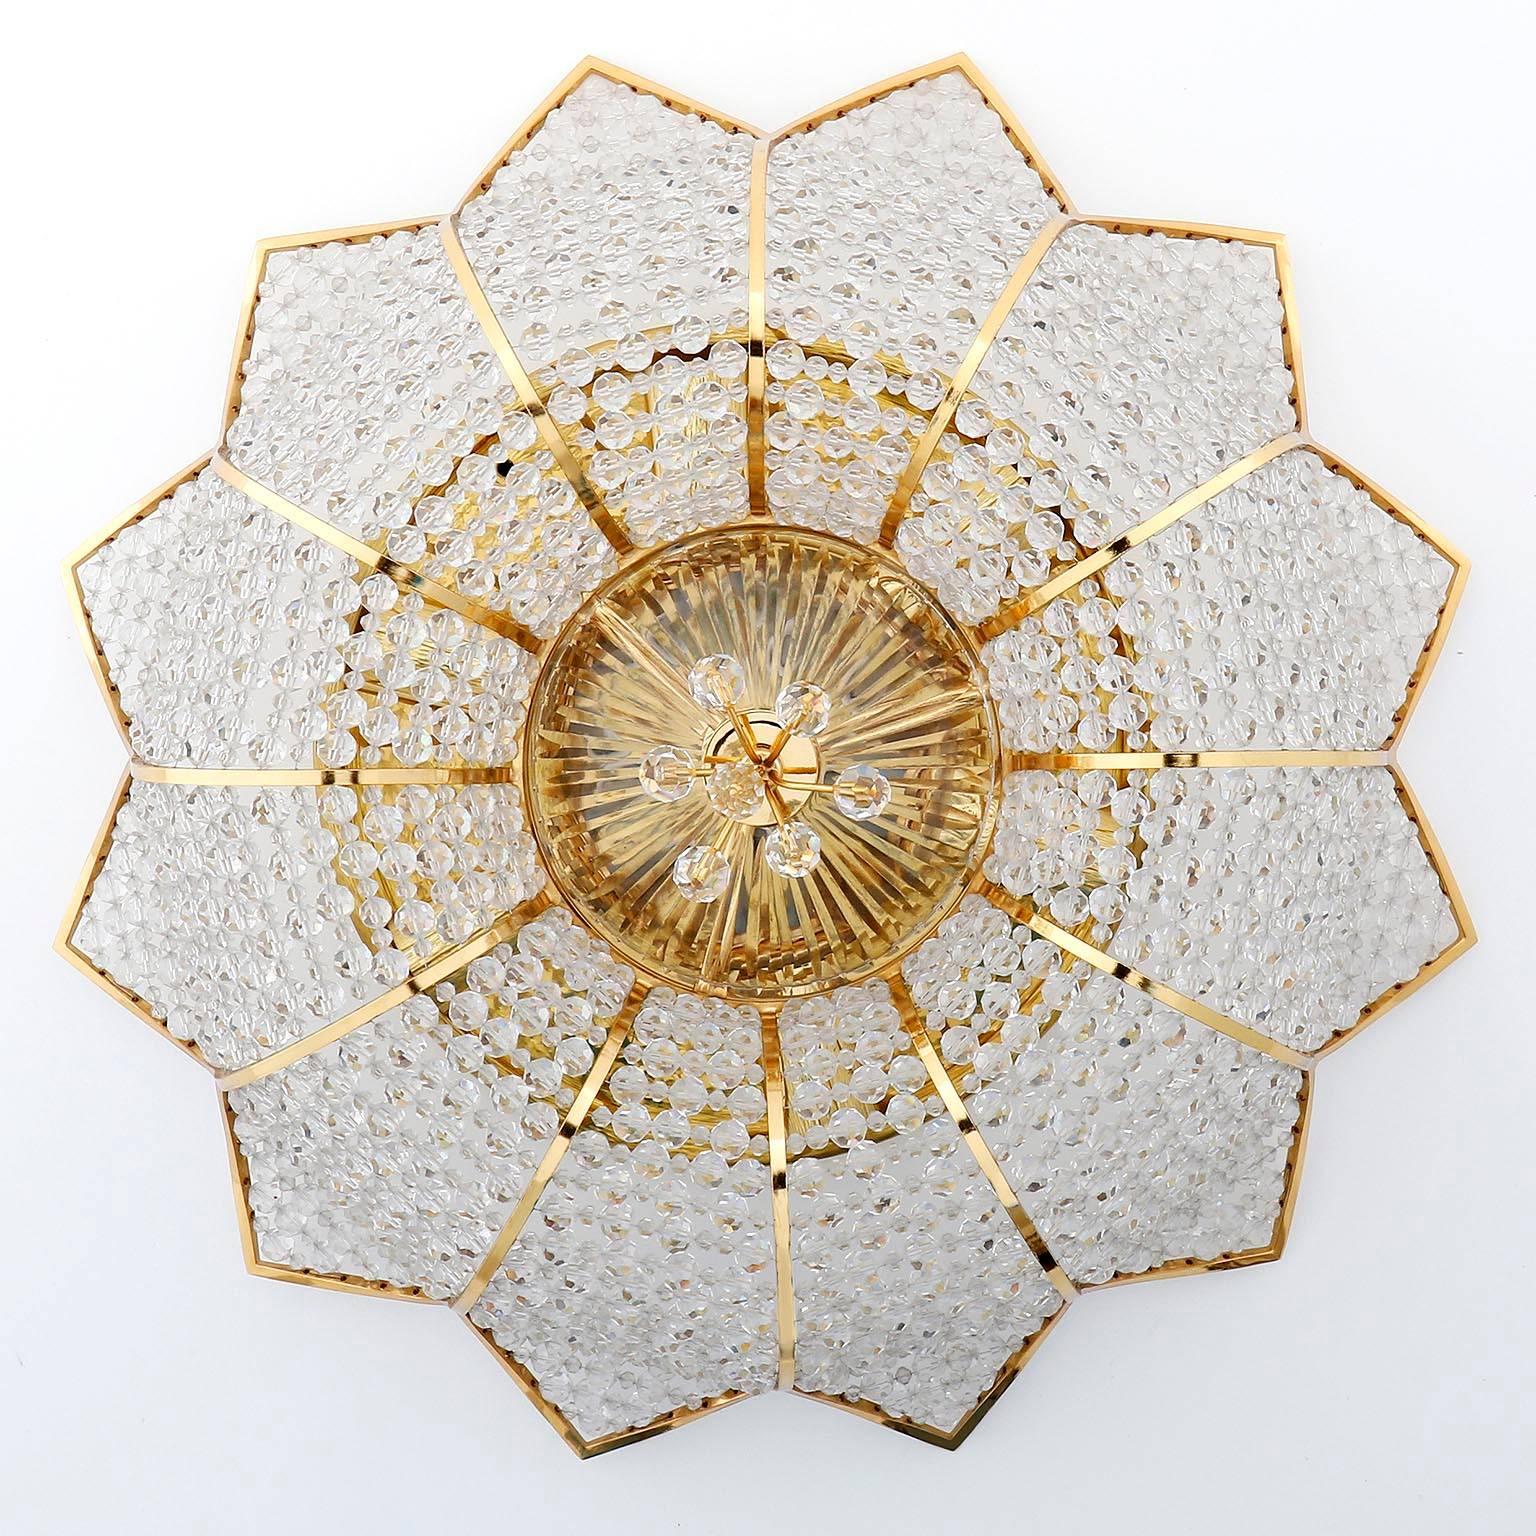 Only one light is available.
One of two beautiful ceiling light fixtures by Palwa (Palme and Walter), Germany, manufactured in Mid-Century, circa 1970 (1960s-1970s). 
They are made of gilded / gilt / gold-plated brass and hundreds of cut crystal